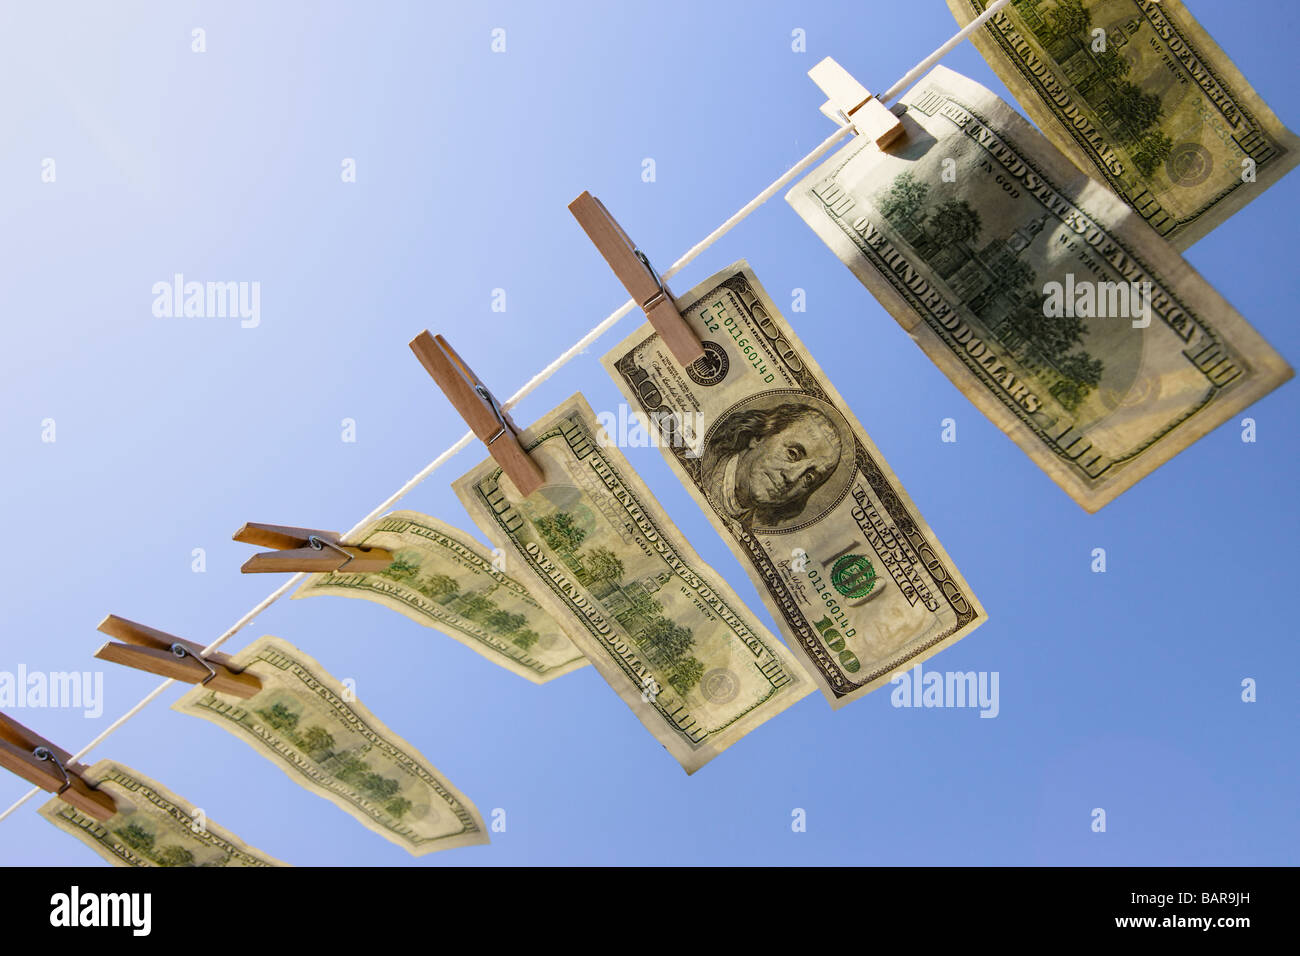 Money Laundering - Dollars: $100 dollar bills drying in the wind under a deep blue sky. Stock Photo